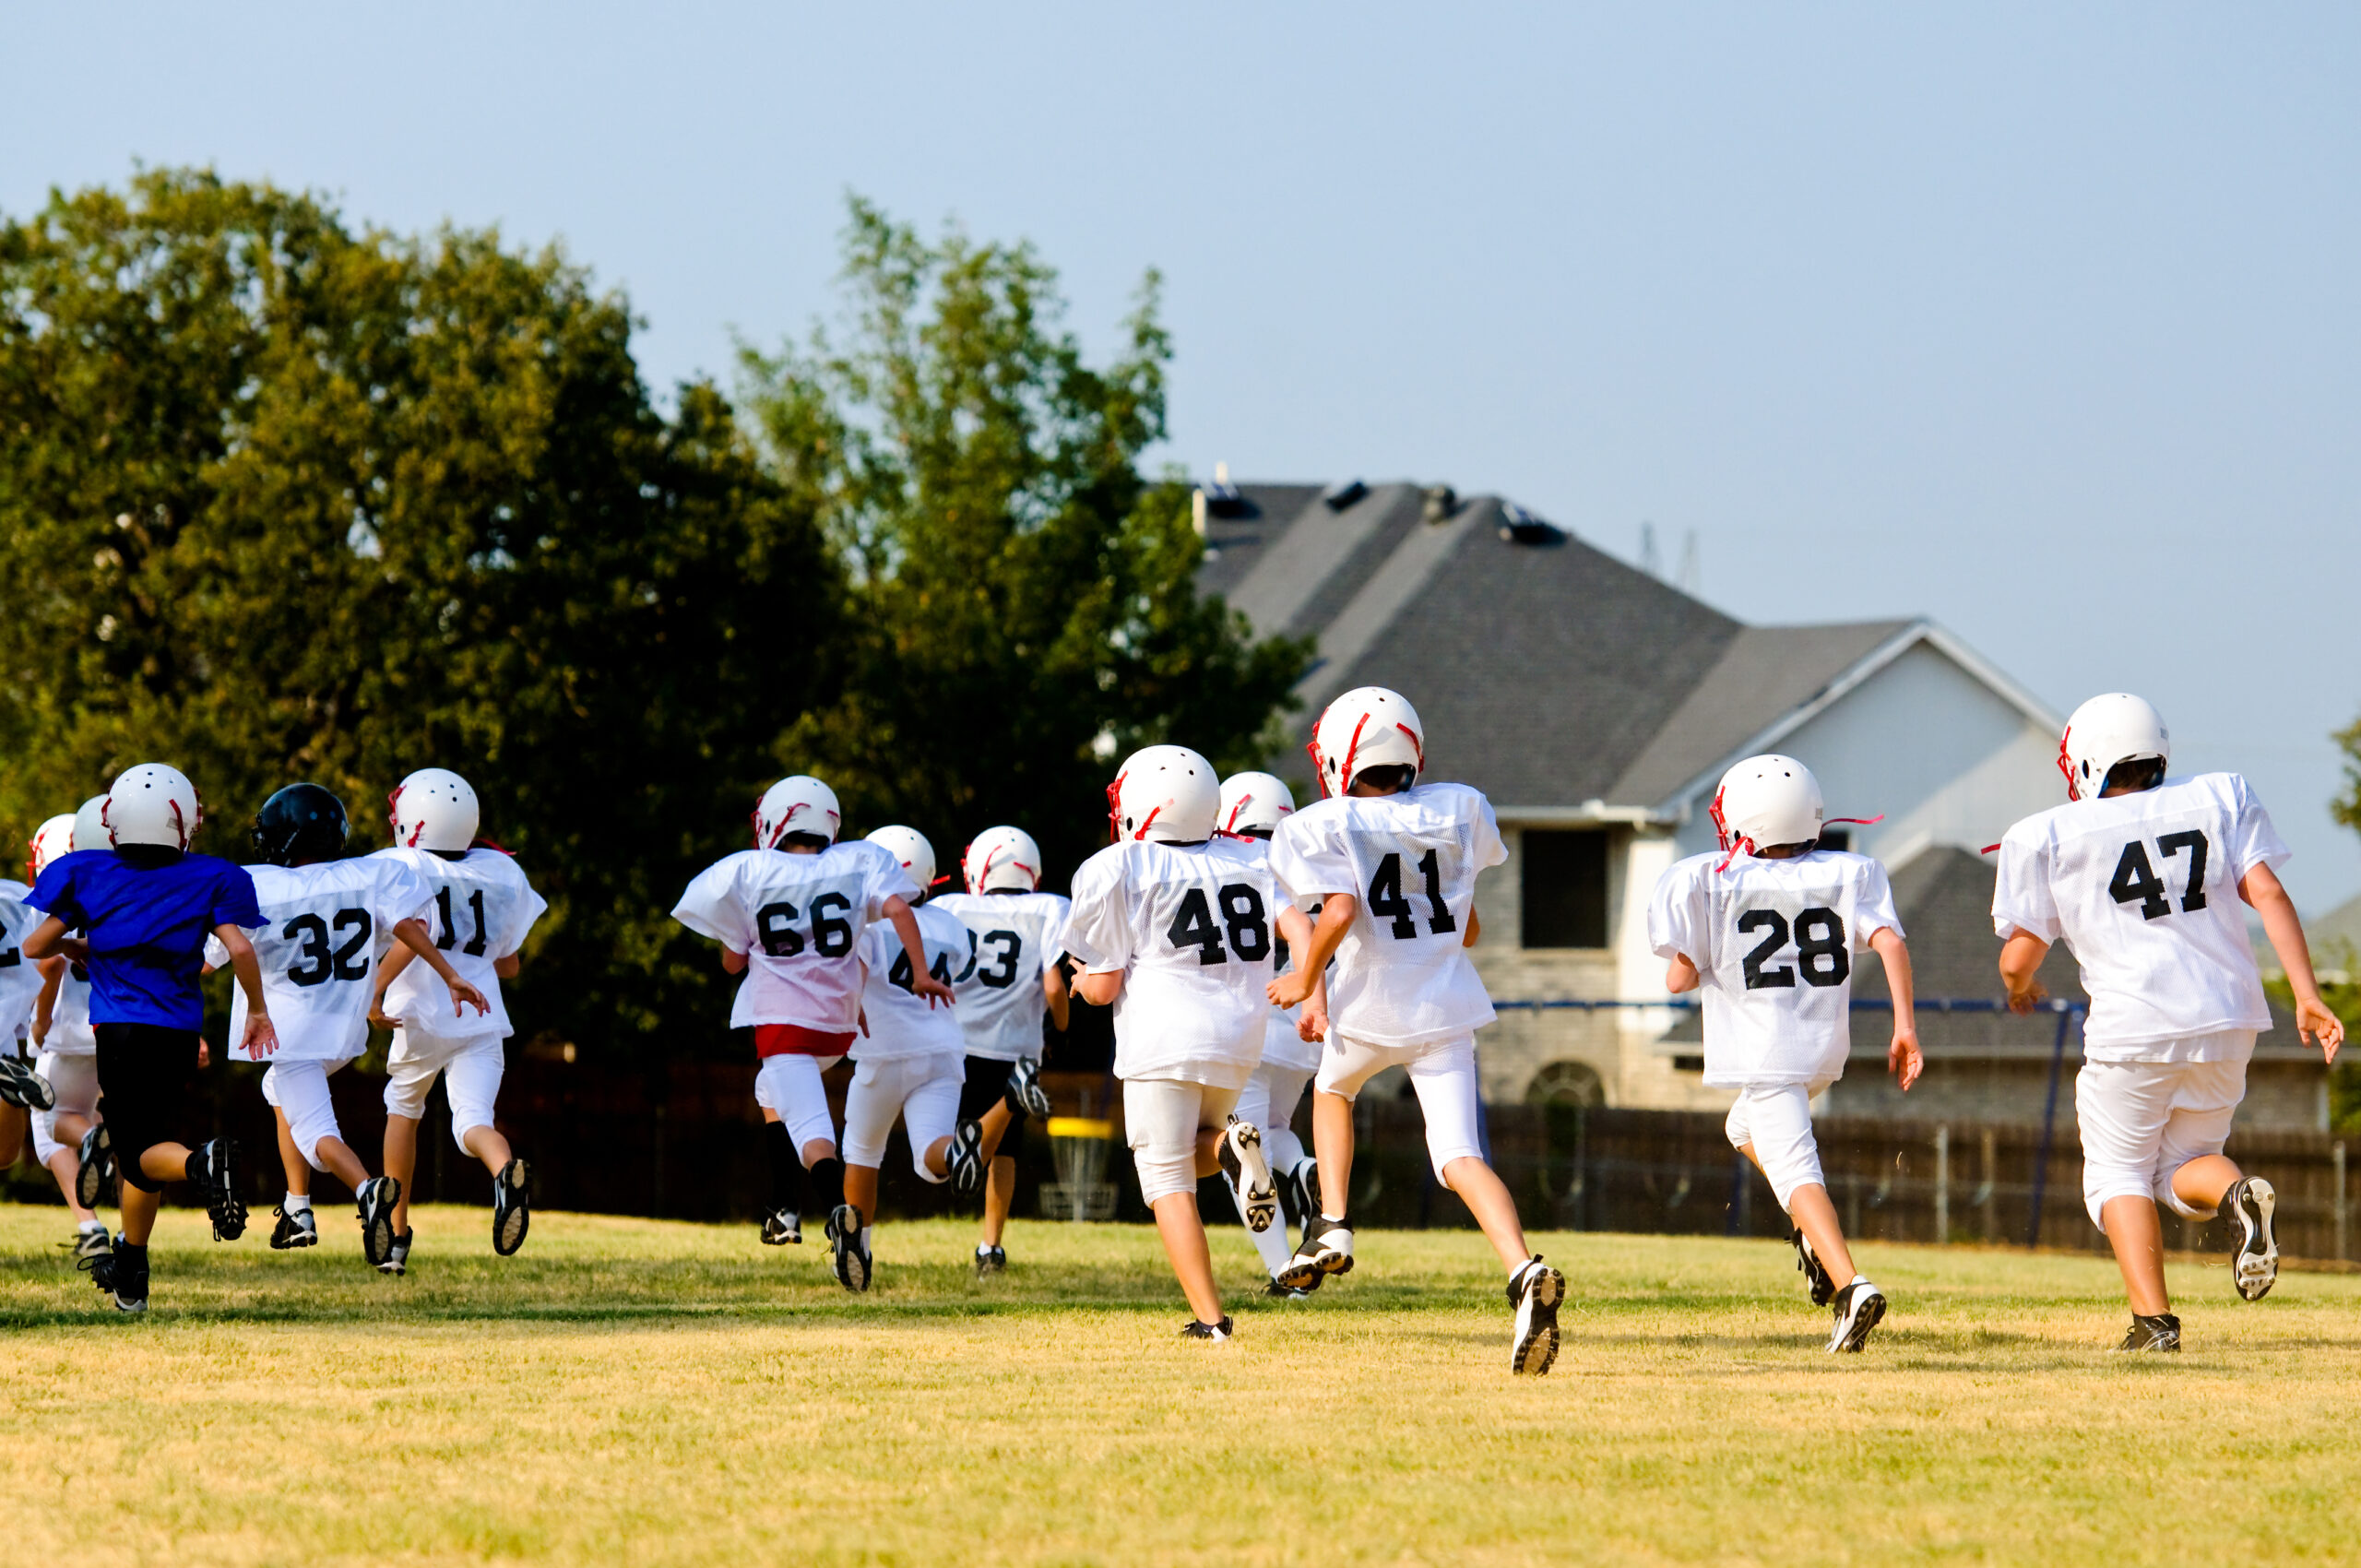 A team of young football players at sports camp gathers on the field, glad to be protected by amateur sports insurance.